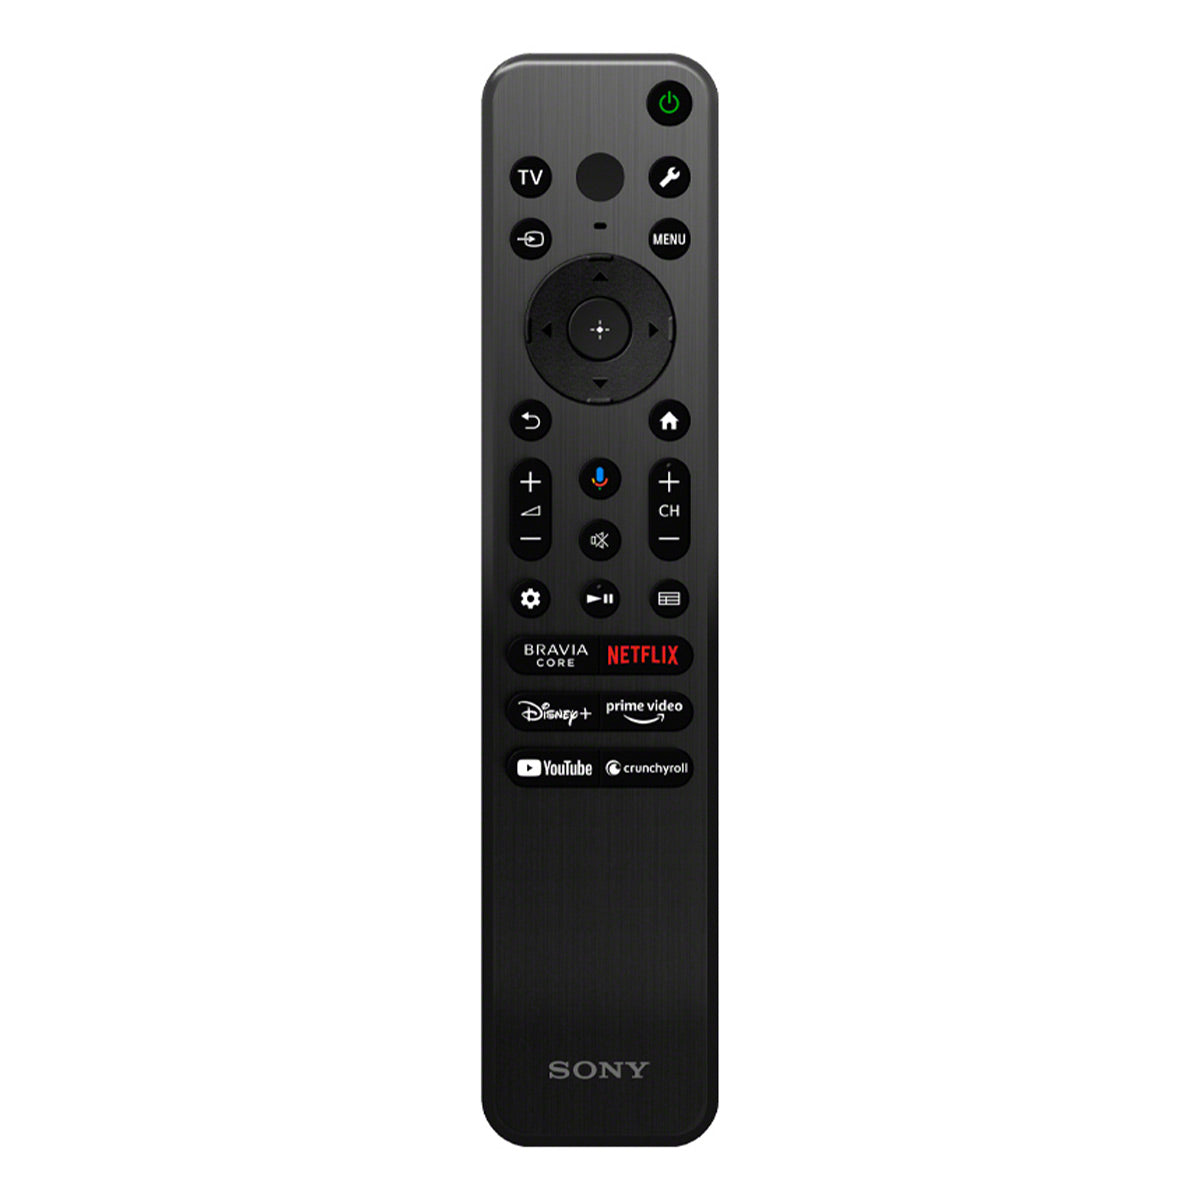 Sony XR77A80L BRAVIA XR 77" Class A80L OLED 4K HDR Google TV (2023) with STR-AZ1000ES 7.2 Channel 8K Home Theater AV Receiver